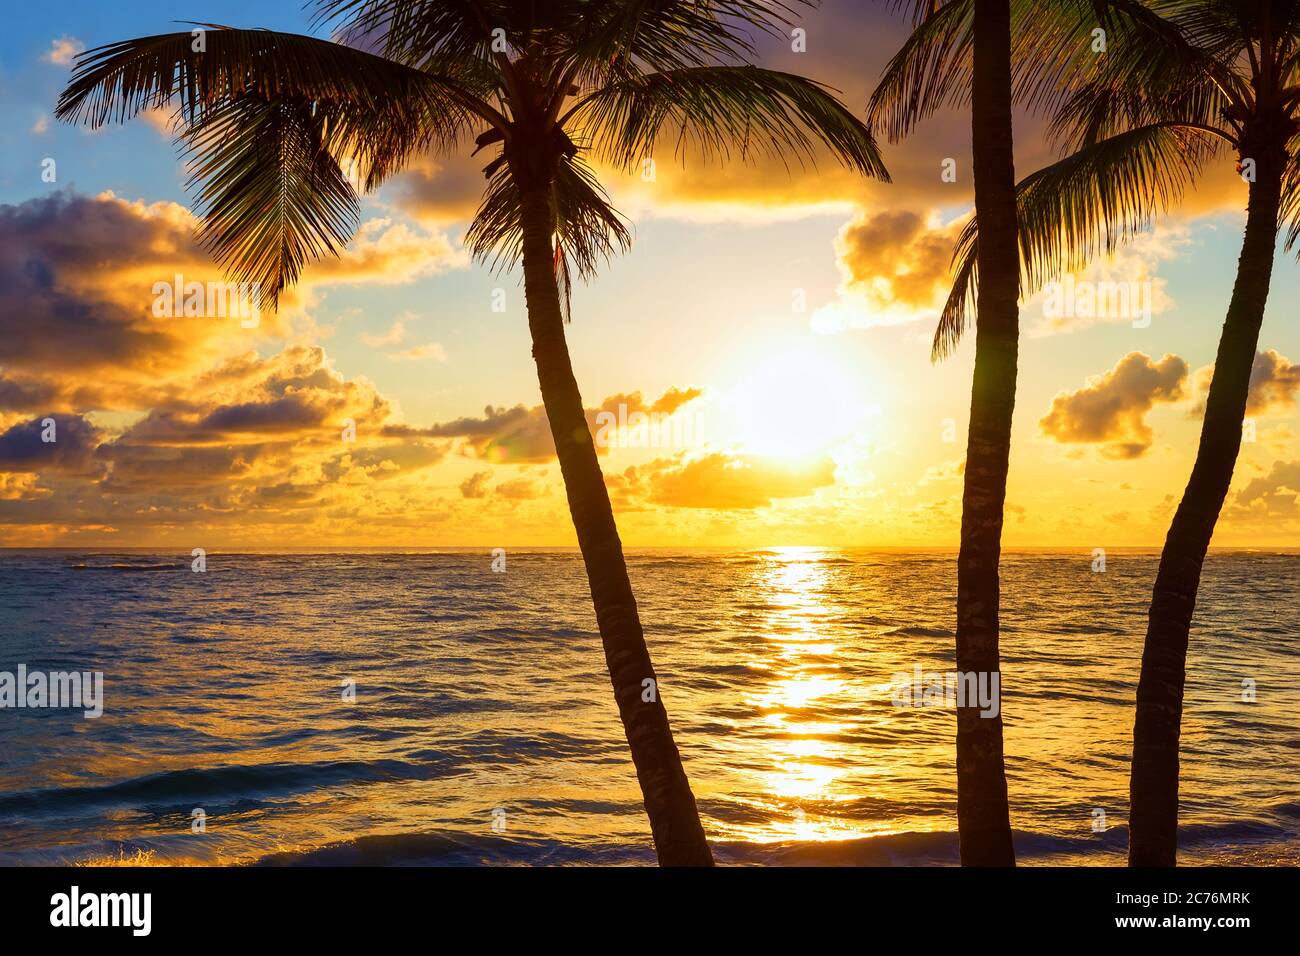 Coconut palm trees on colorful sun set Stock Photo